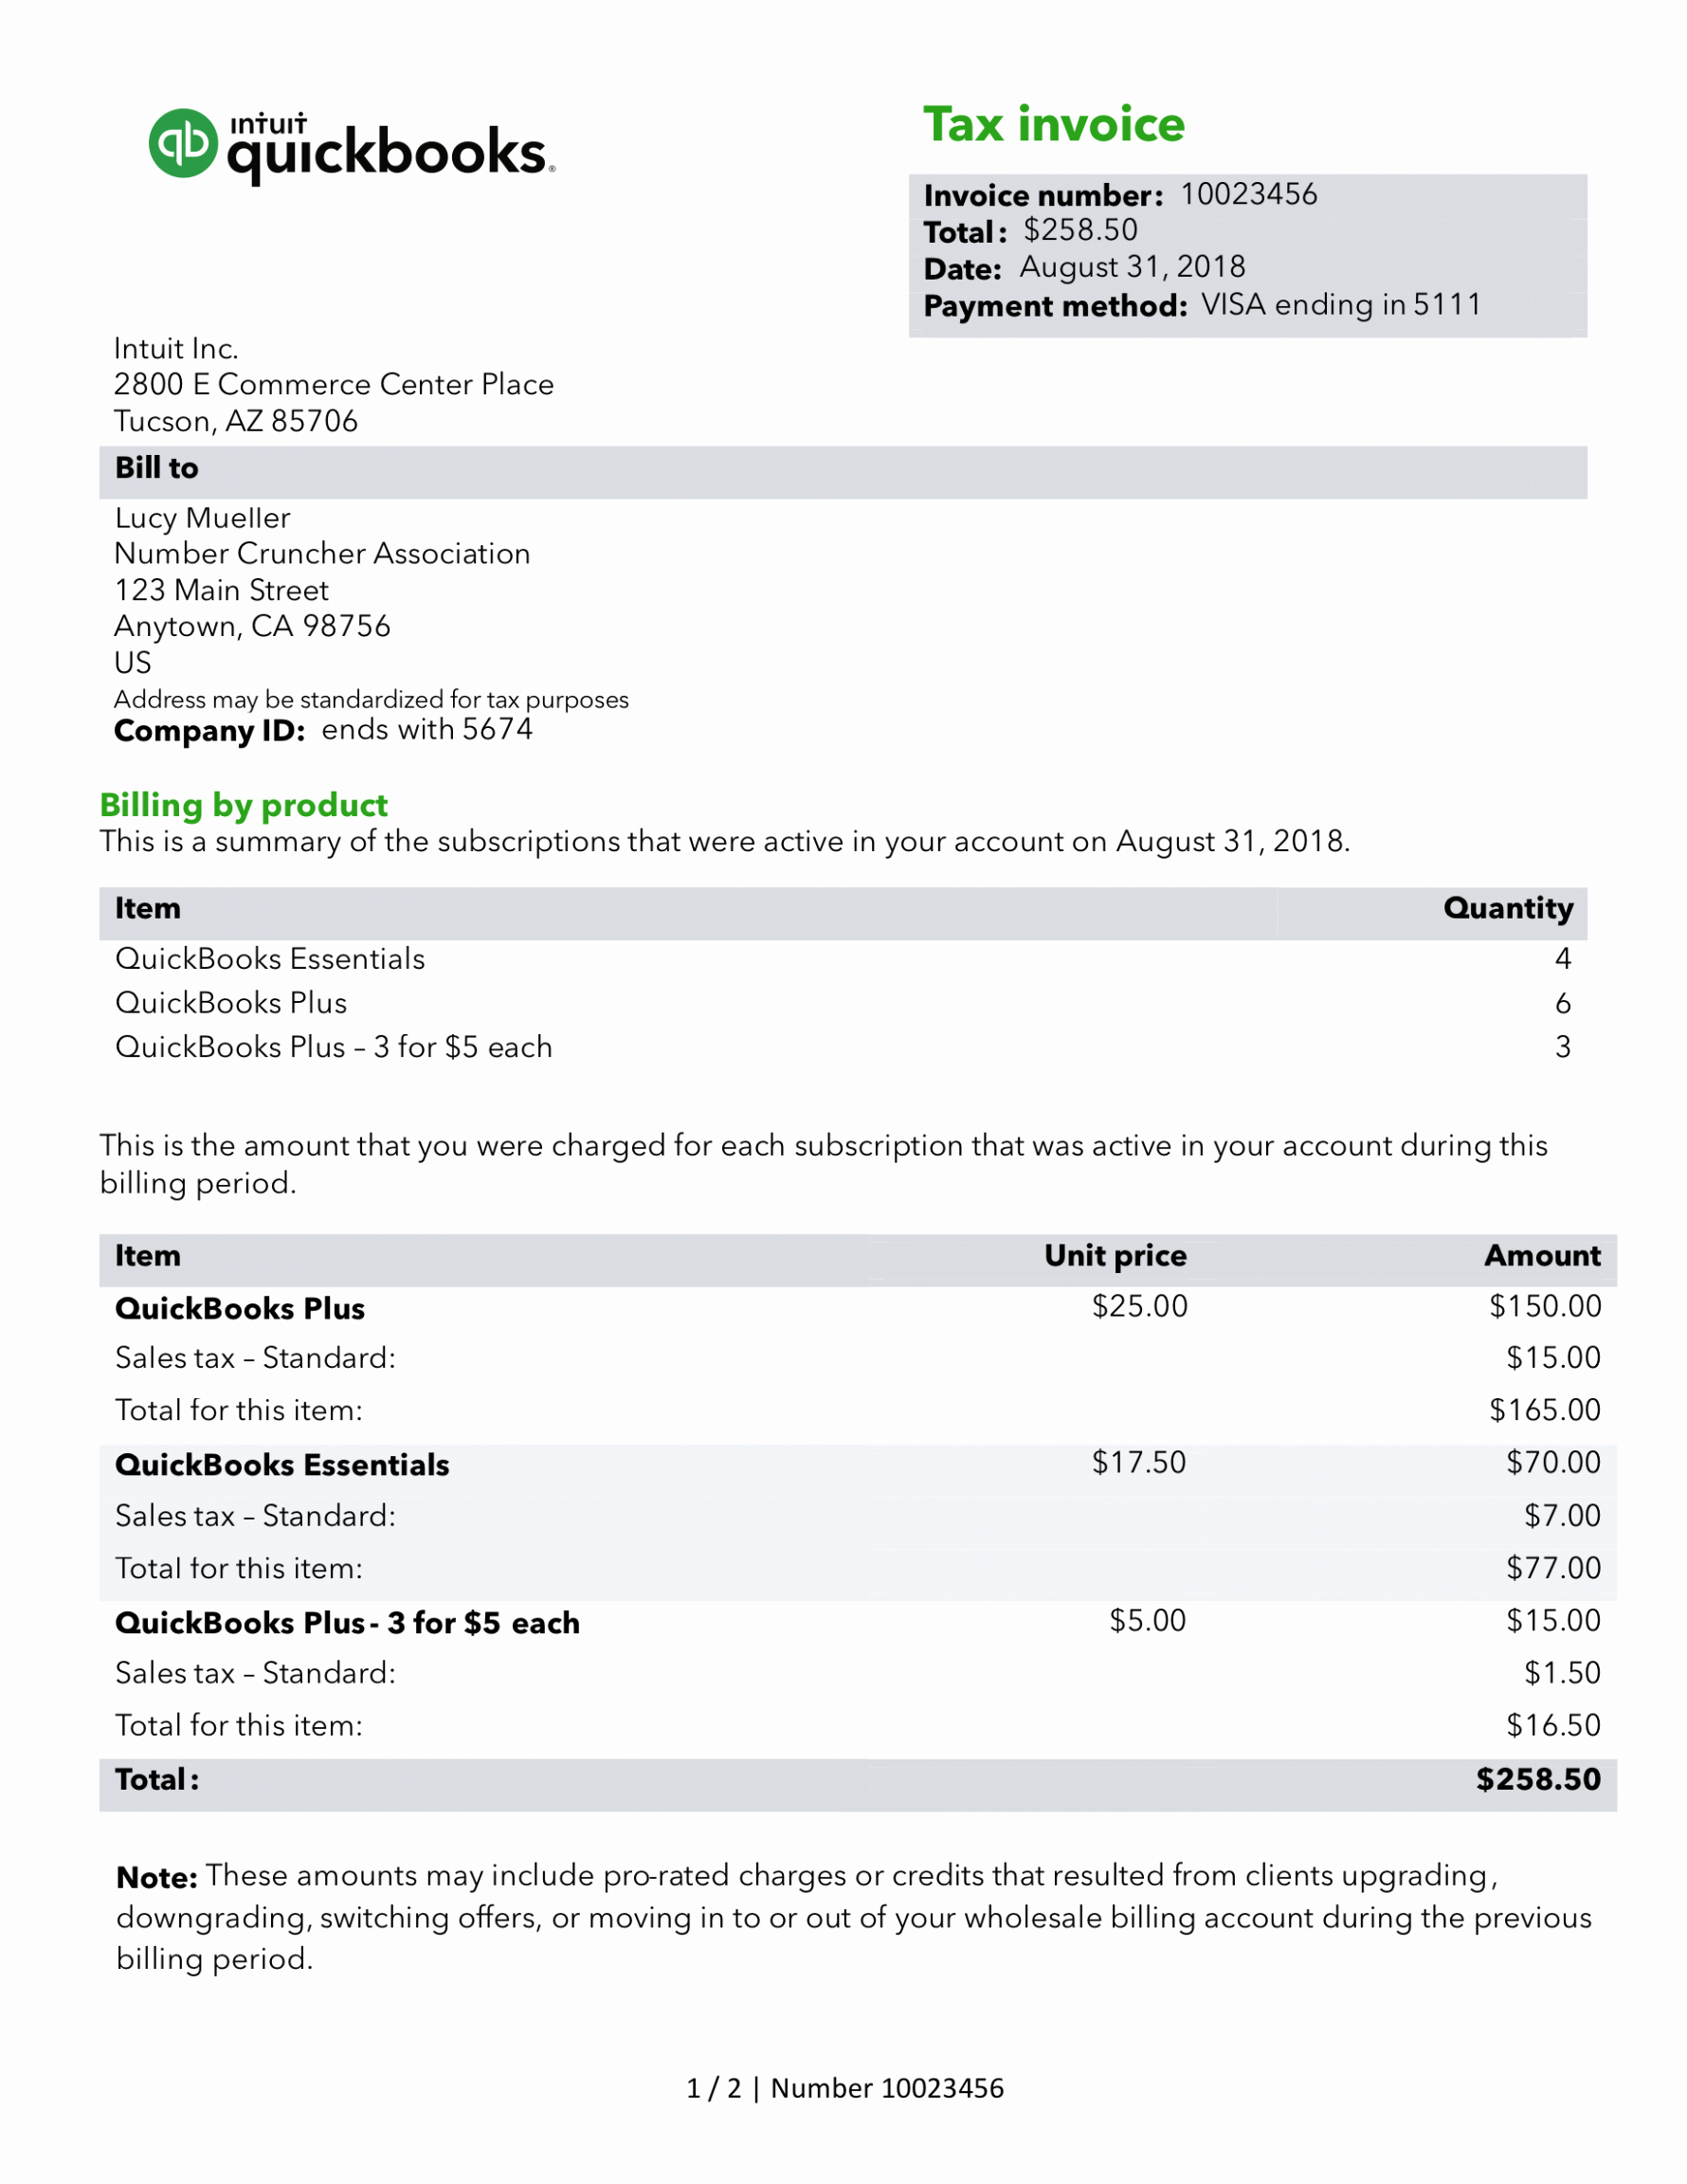 Moving Company Invoice Template Beautiful Invoice Bill to